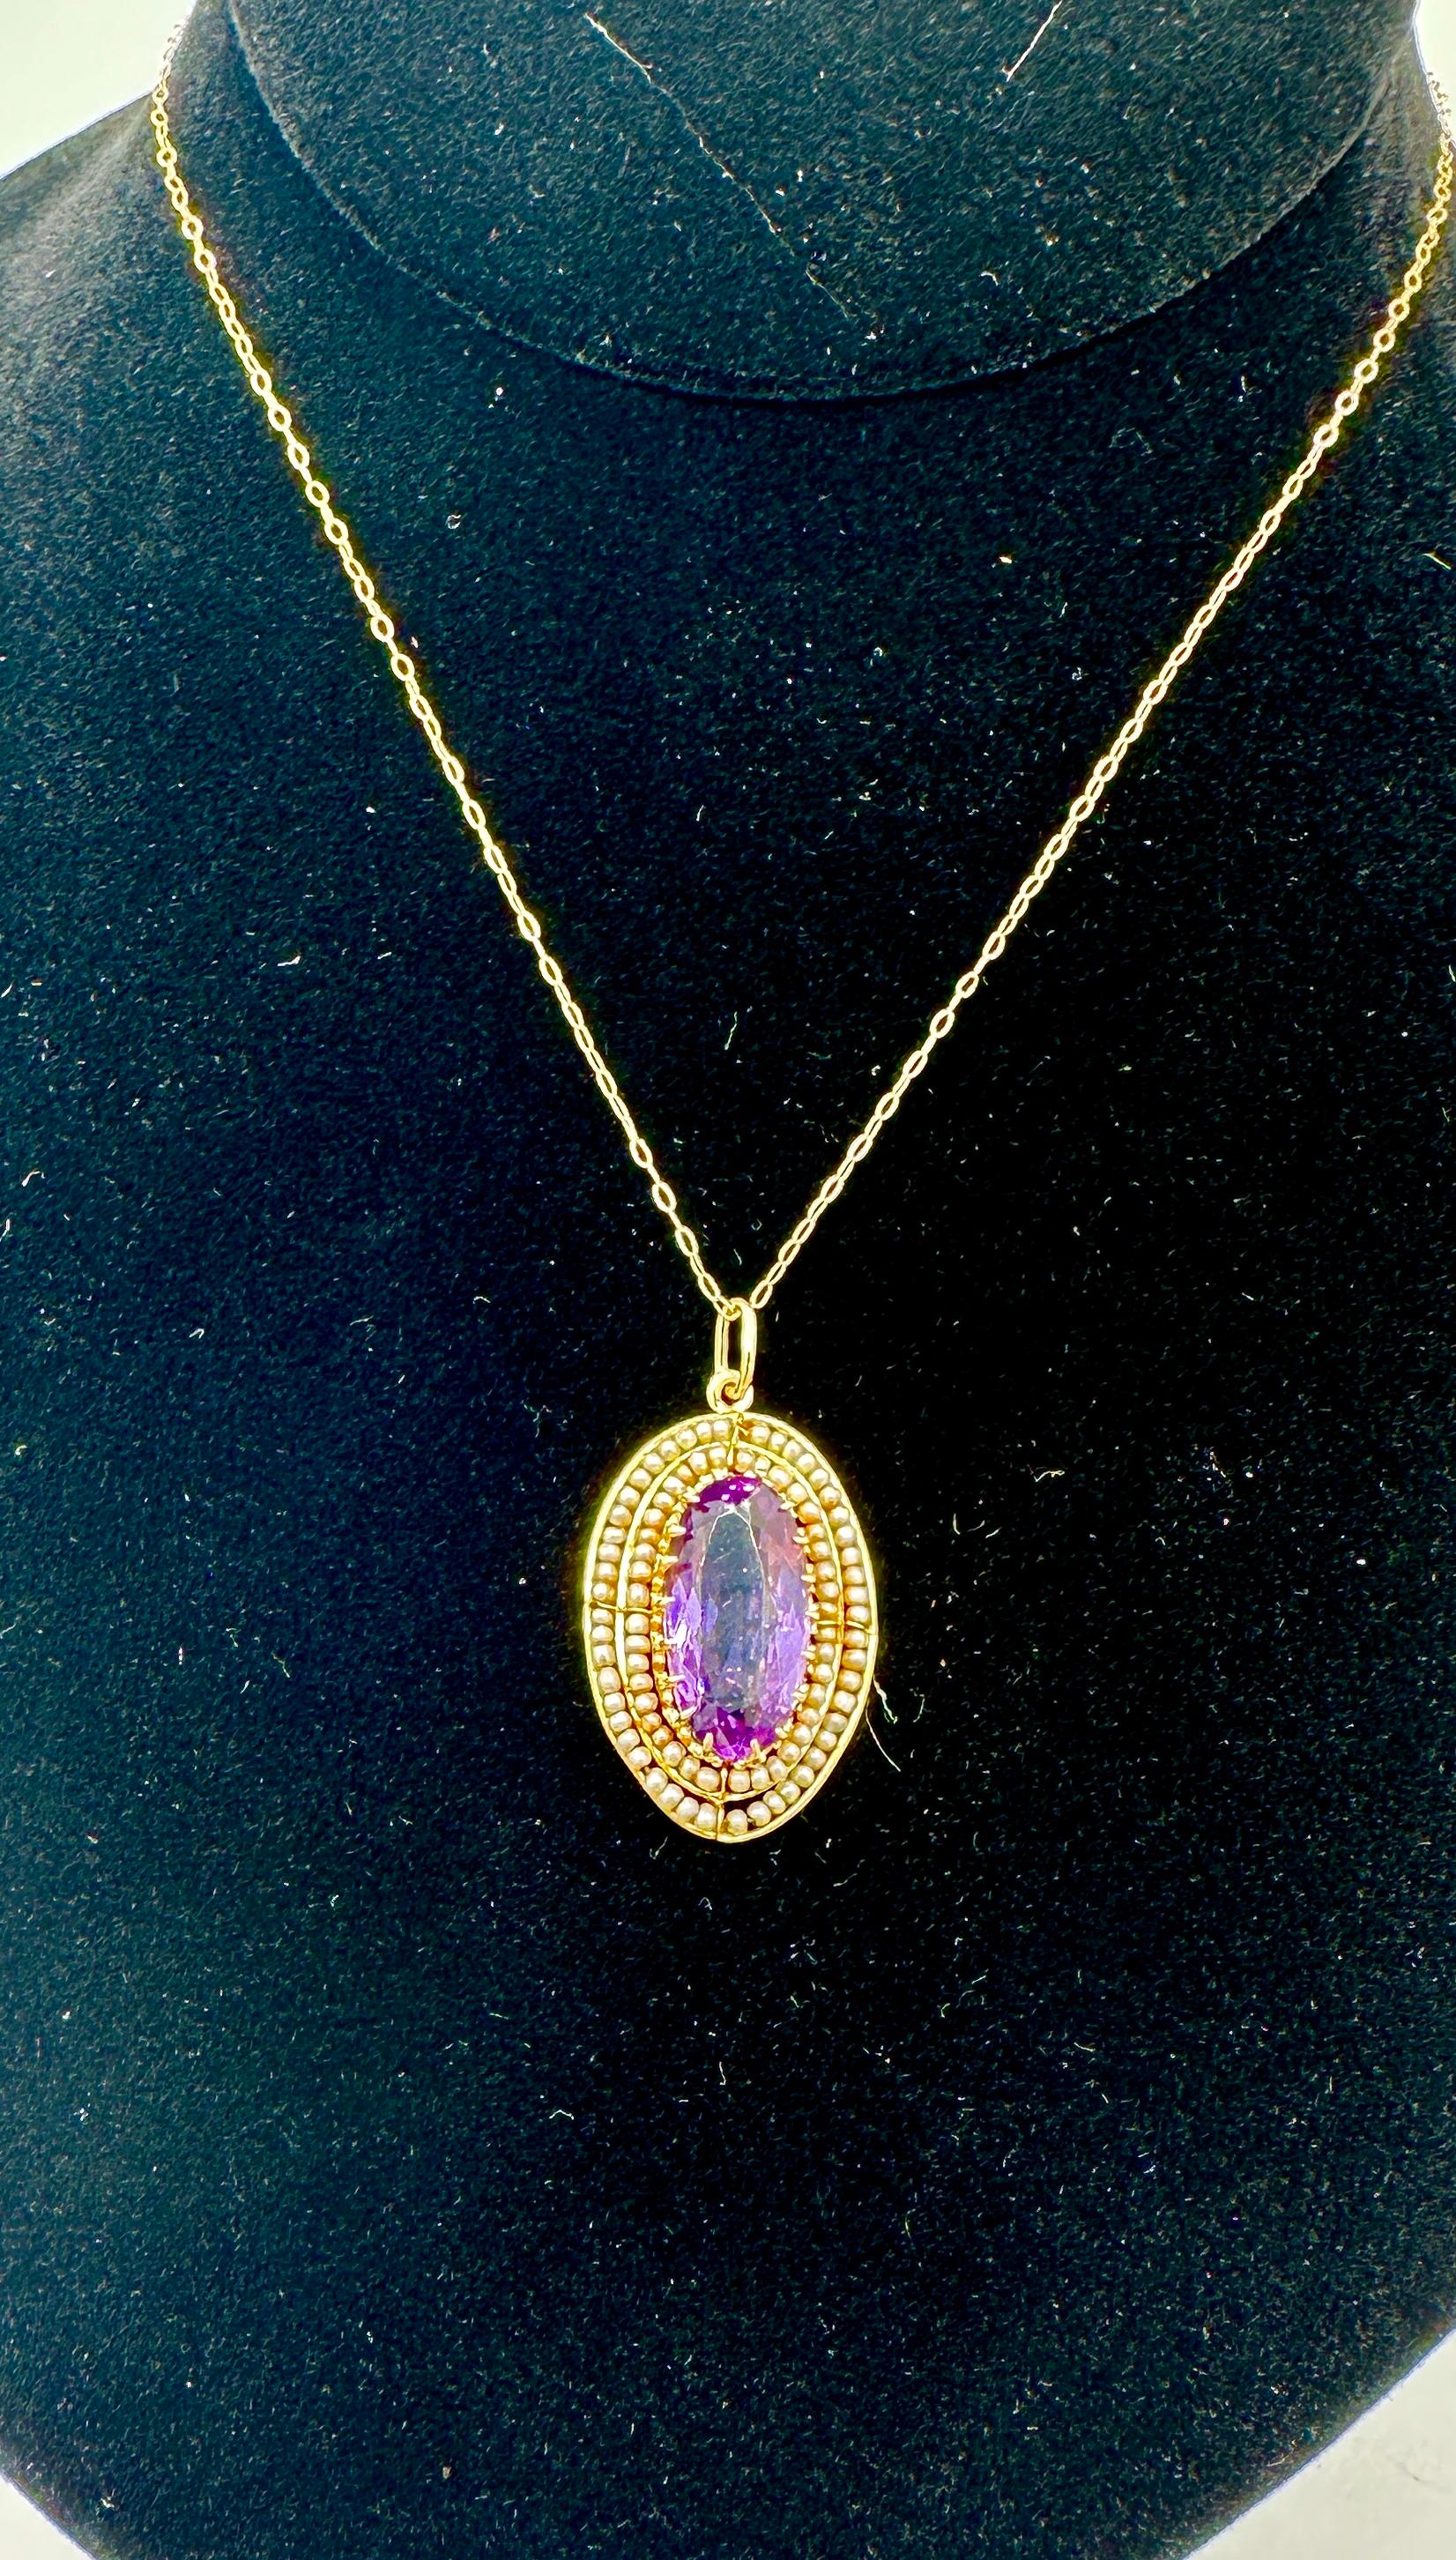 Victorian 2.5 Carat Amethyst Pearl Lavaliere Pendant Necklace Antique 14K Gold In Excellent Condition For Sale In New York, NY